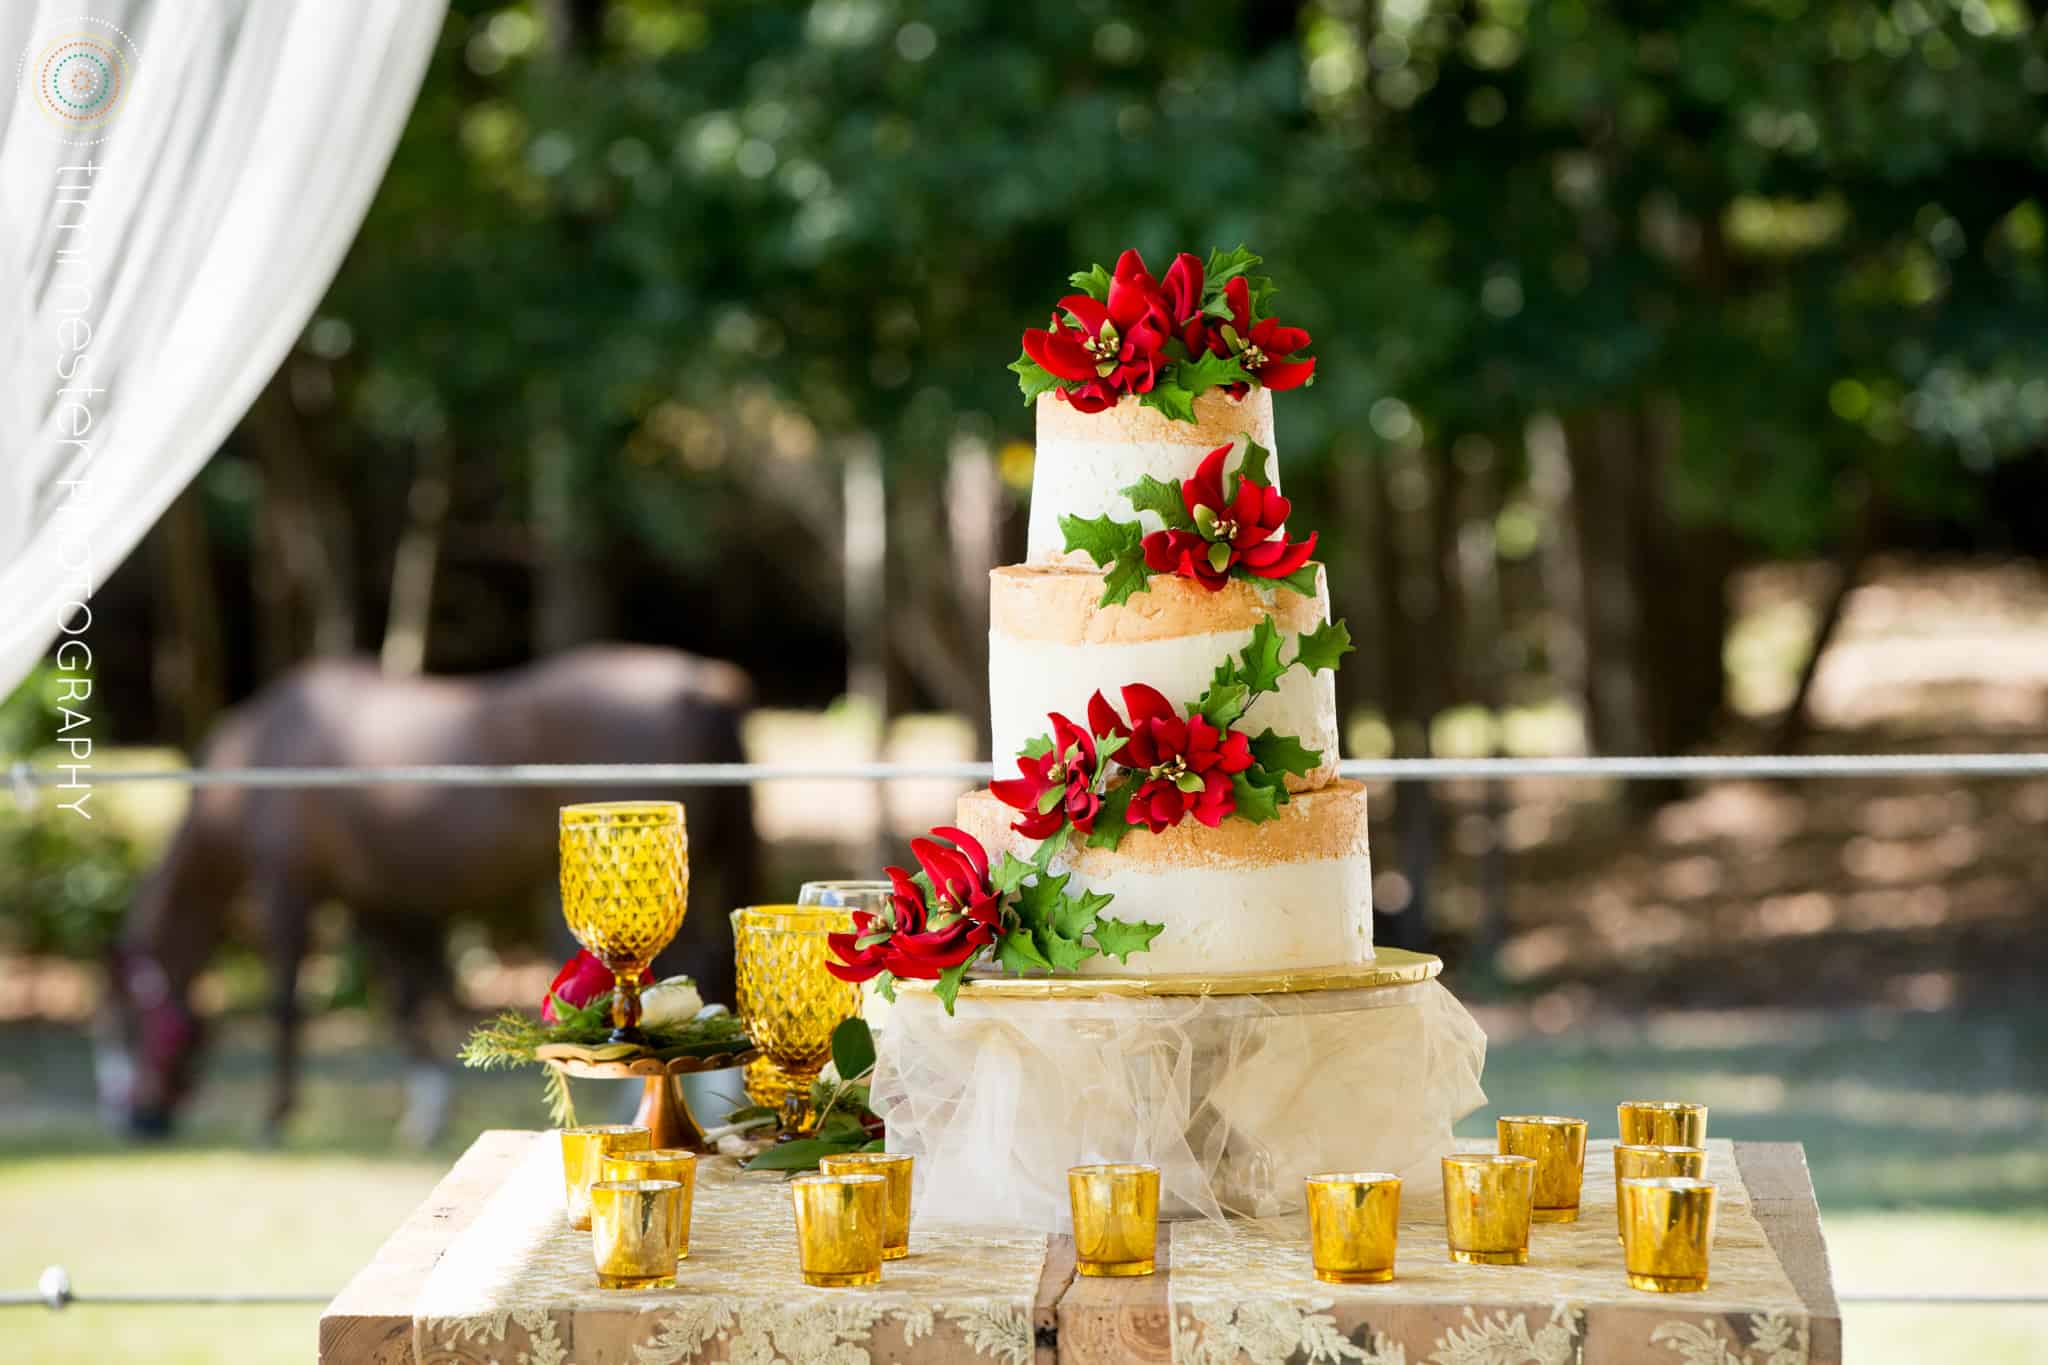 Wedding Cake decorated with Poinsettias 